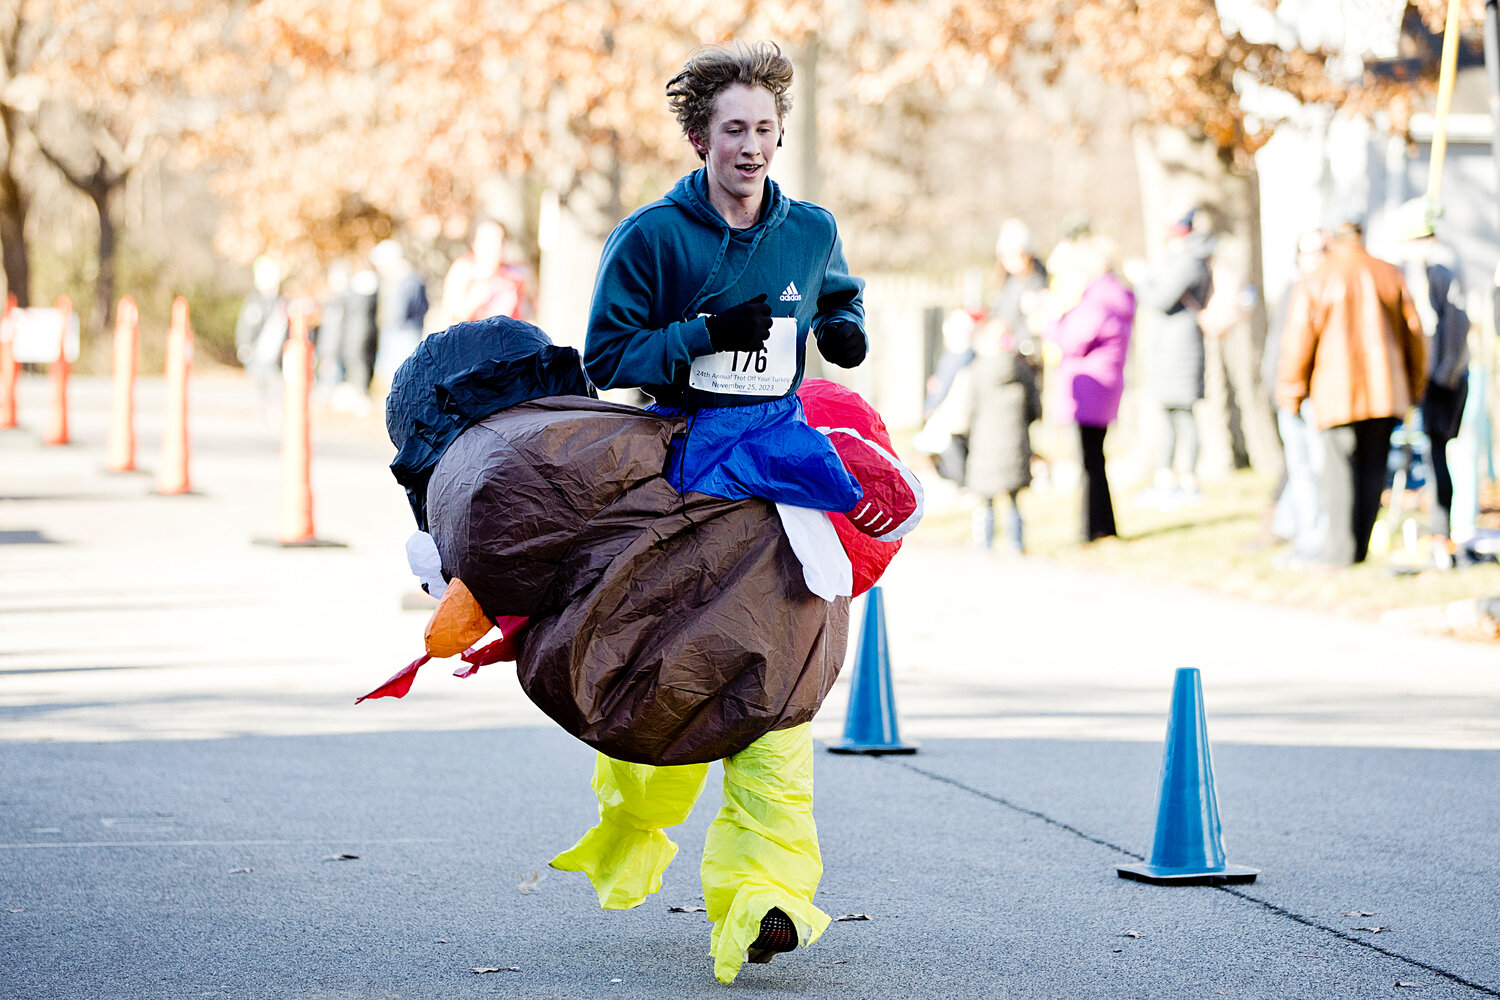 Barrington’s Sam Bishop runs toward the finish line of the 24th annual Trot Off Your Turkey 5K on Saturday. The event raises money for St. Luke’s School.